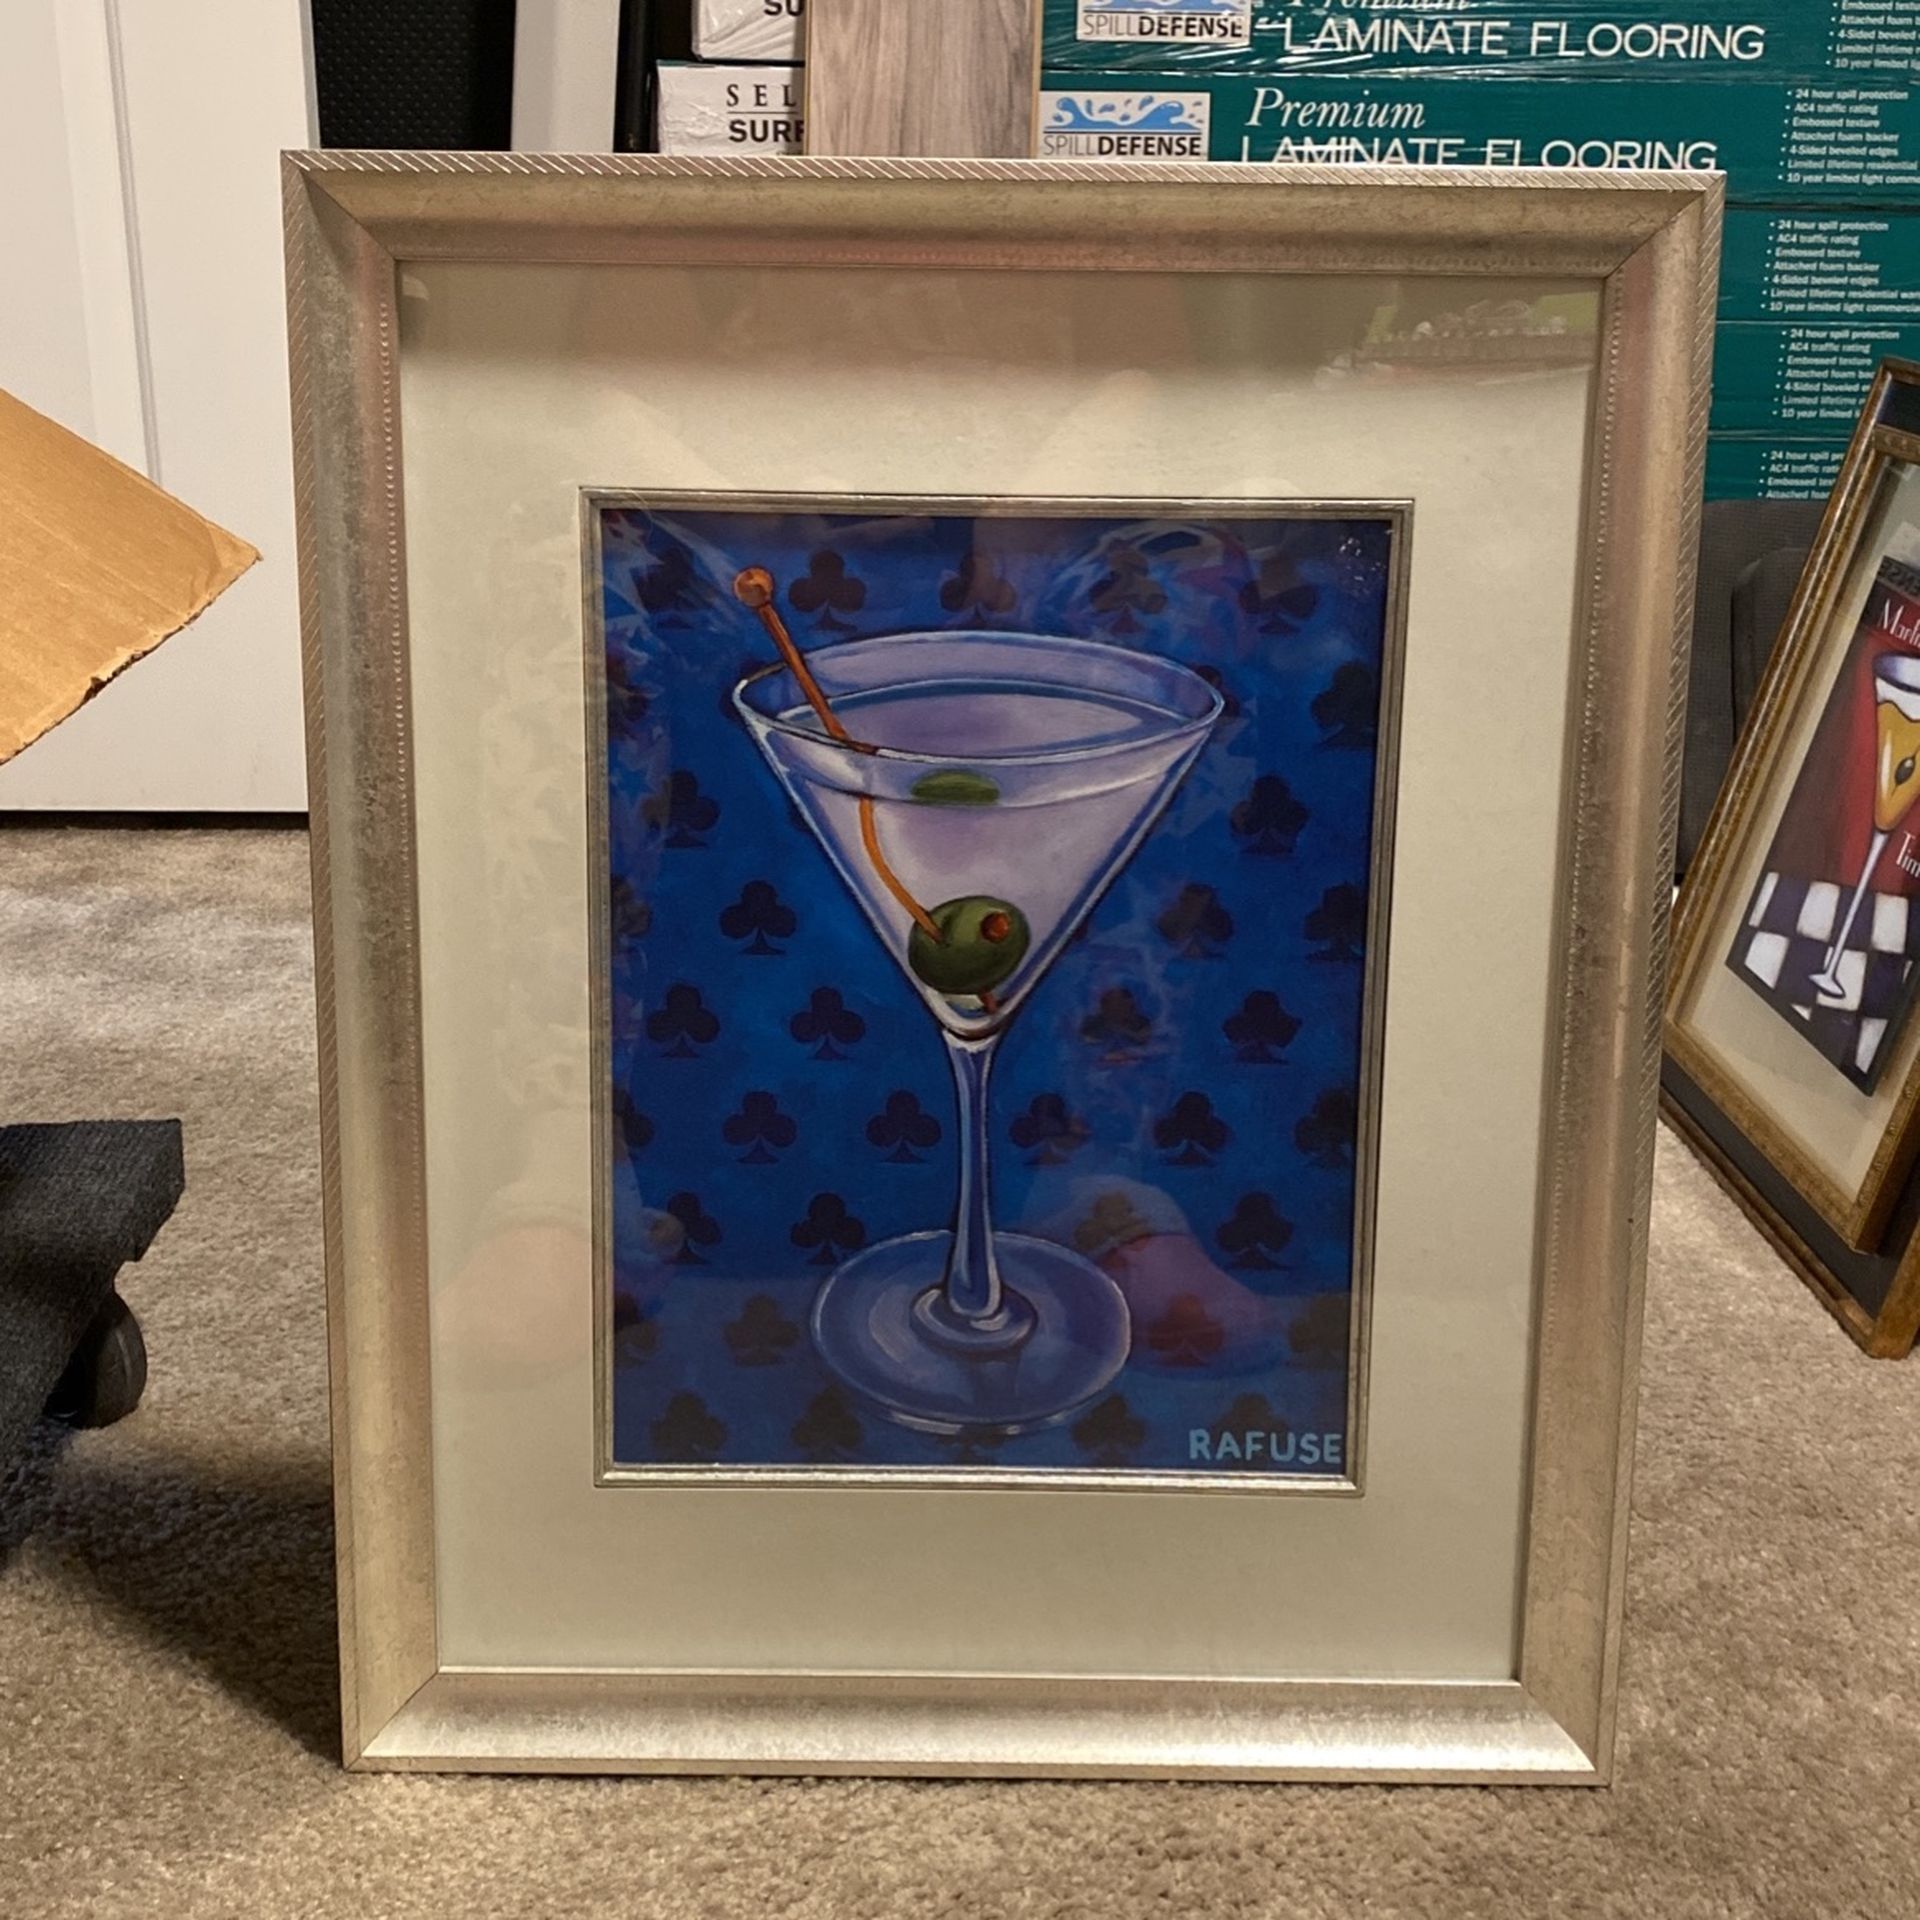 Large Framed Martini Art (Rafuse Print) Under Glass Traditional Martini With Card Suit Clubs In Background